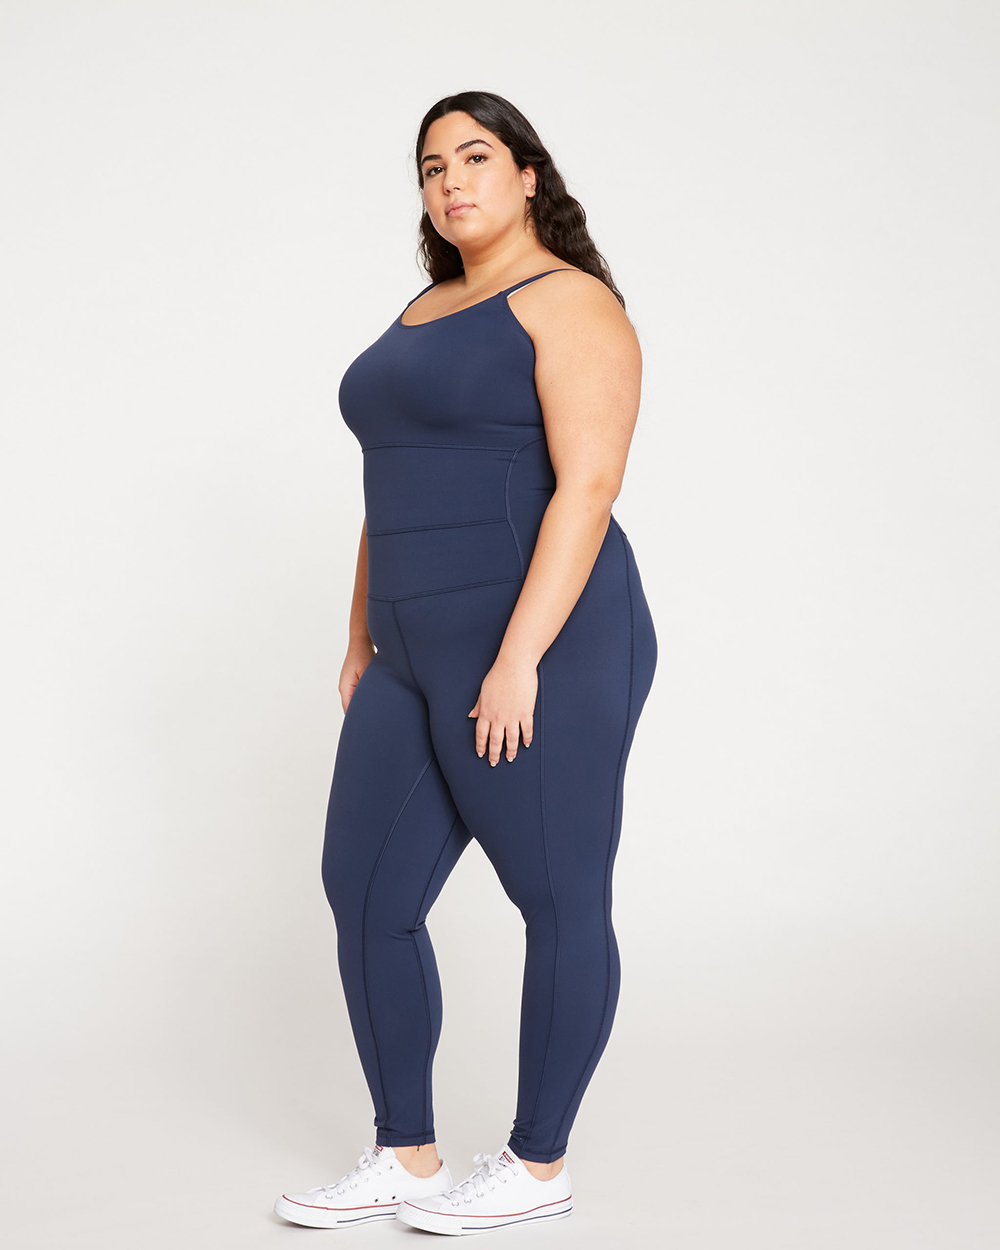 A model wearing a navy full-length workout bodysuit from Universal Standard and standing against a white background.